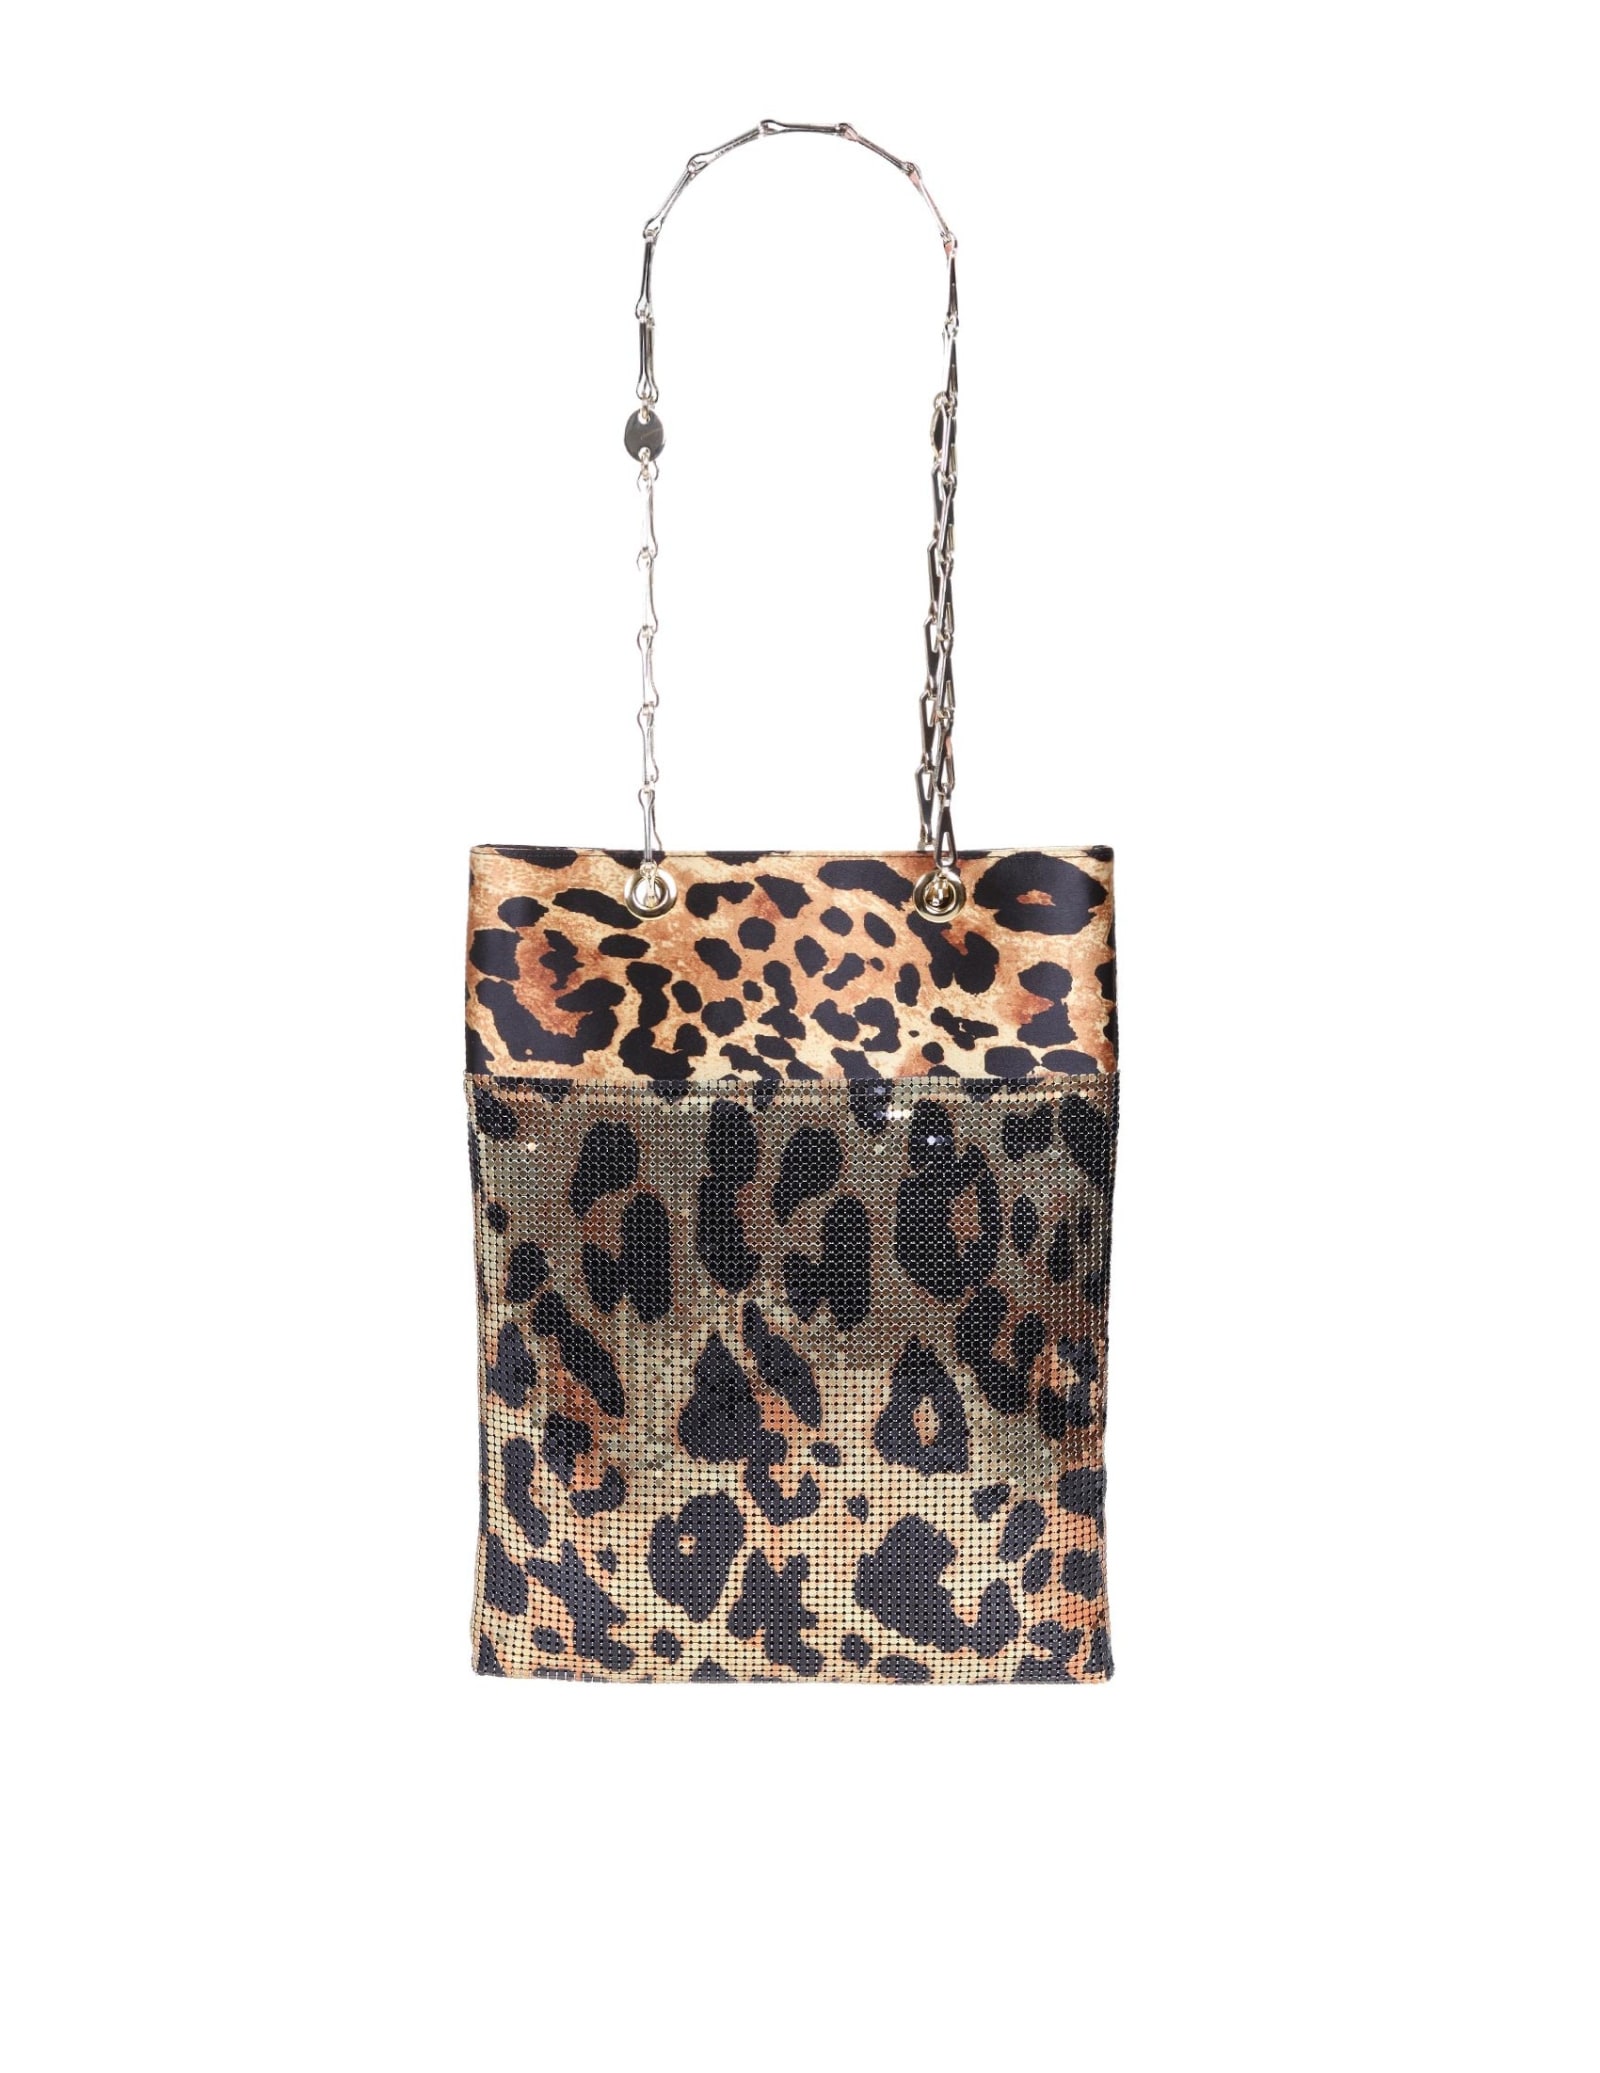 Paco Rabanne Shoulder Bag In Fabric With Leopard Print